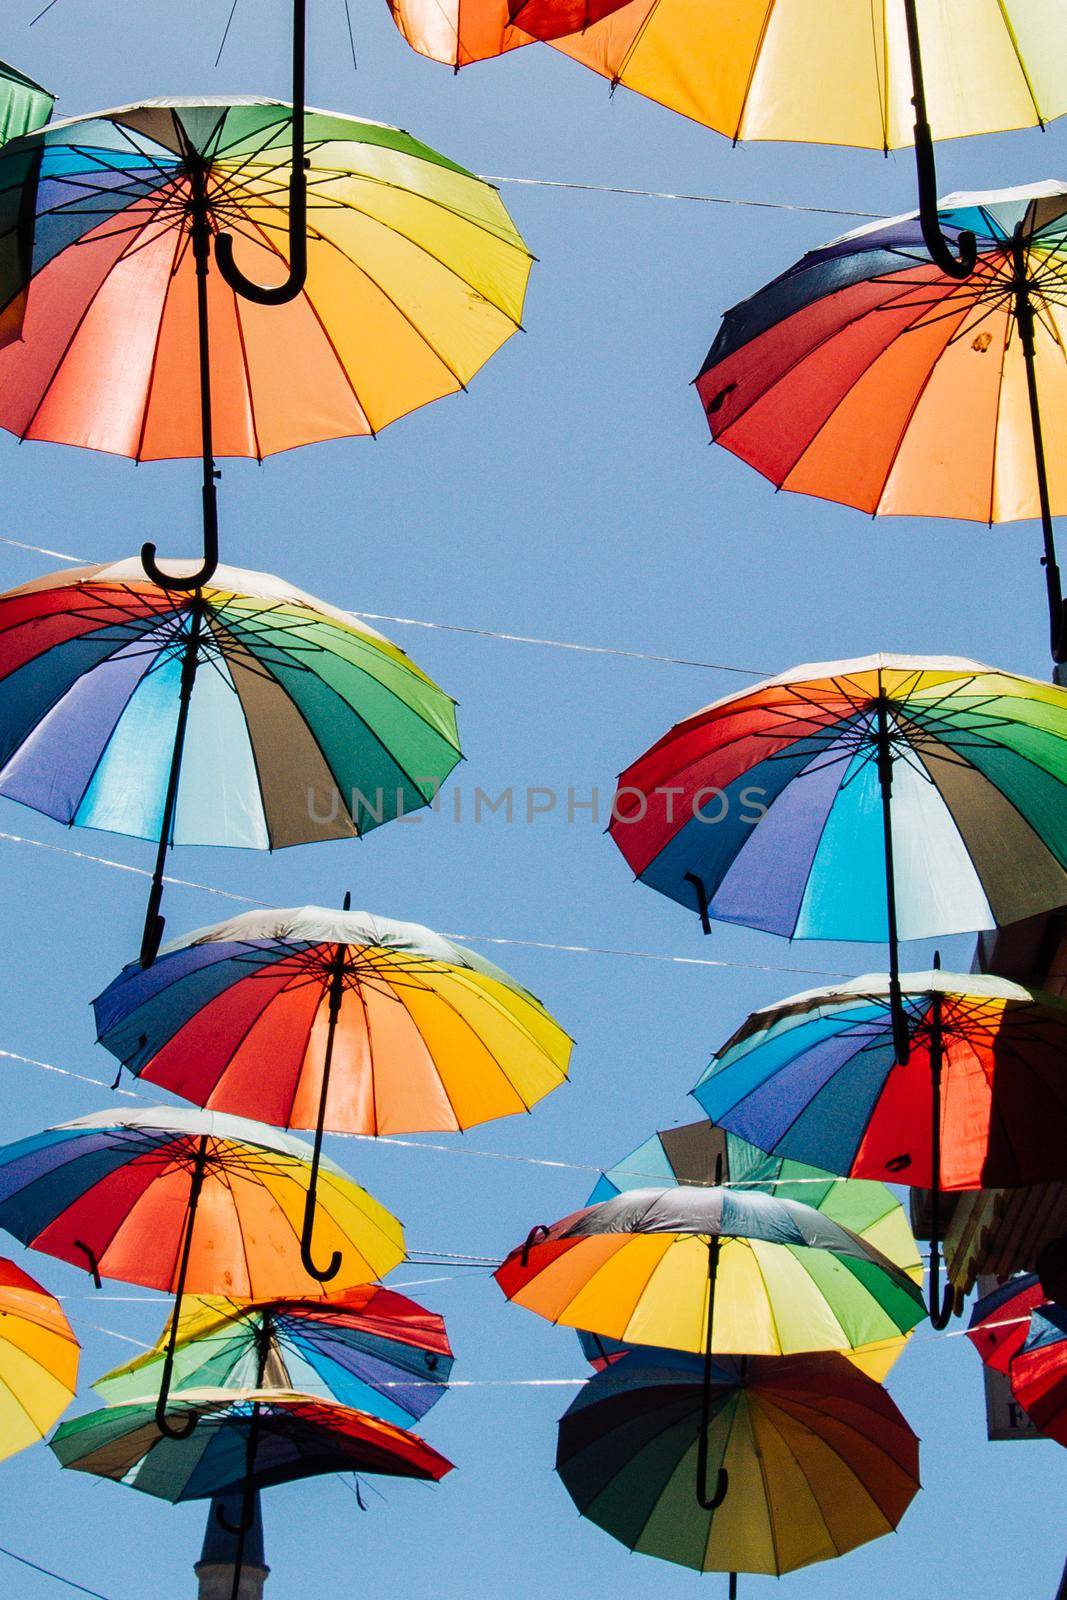 colorful umbrellas used in the sky street decoration